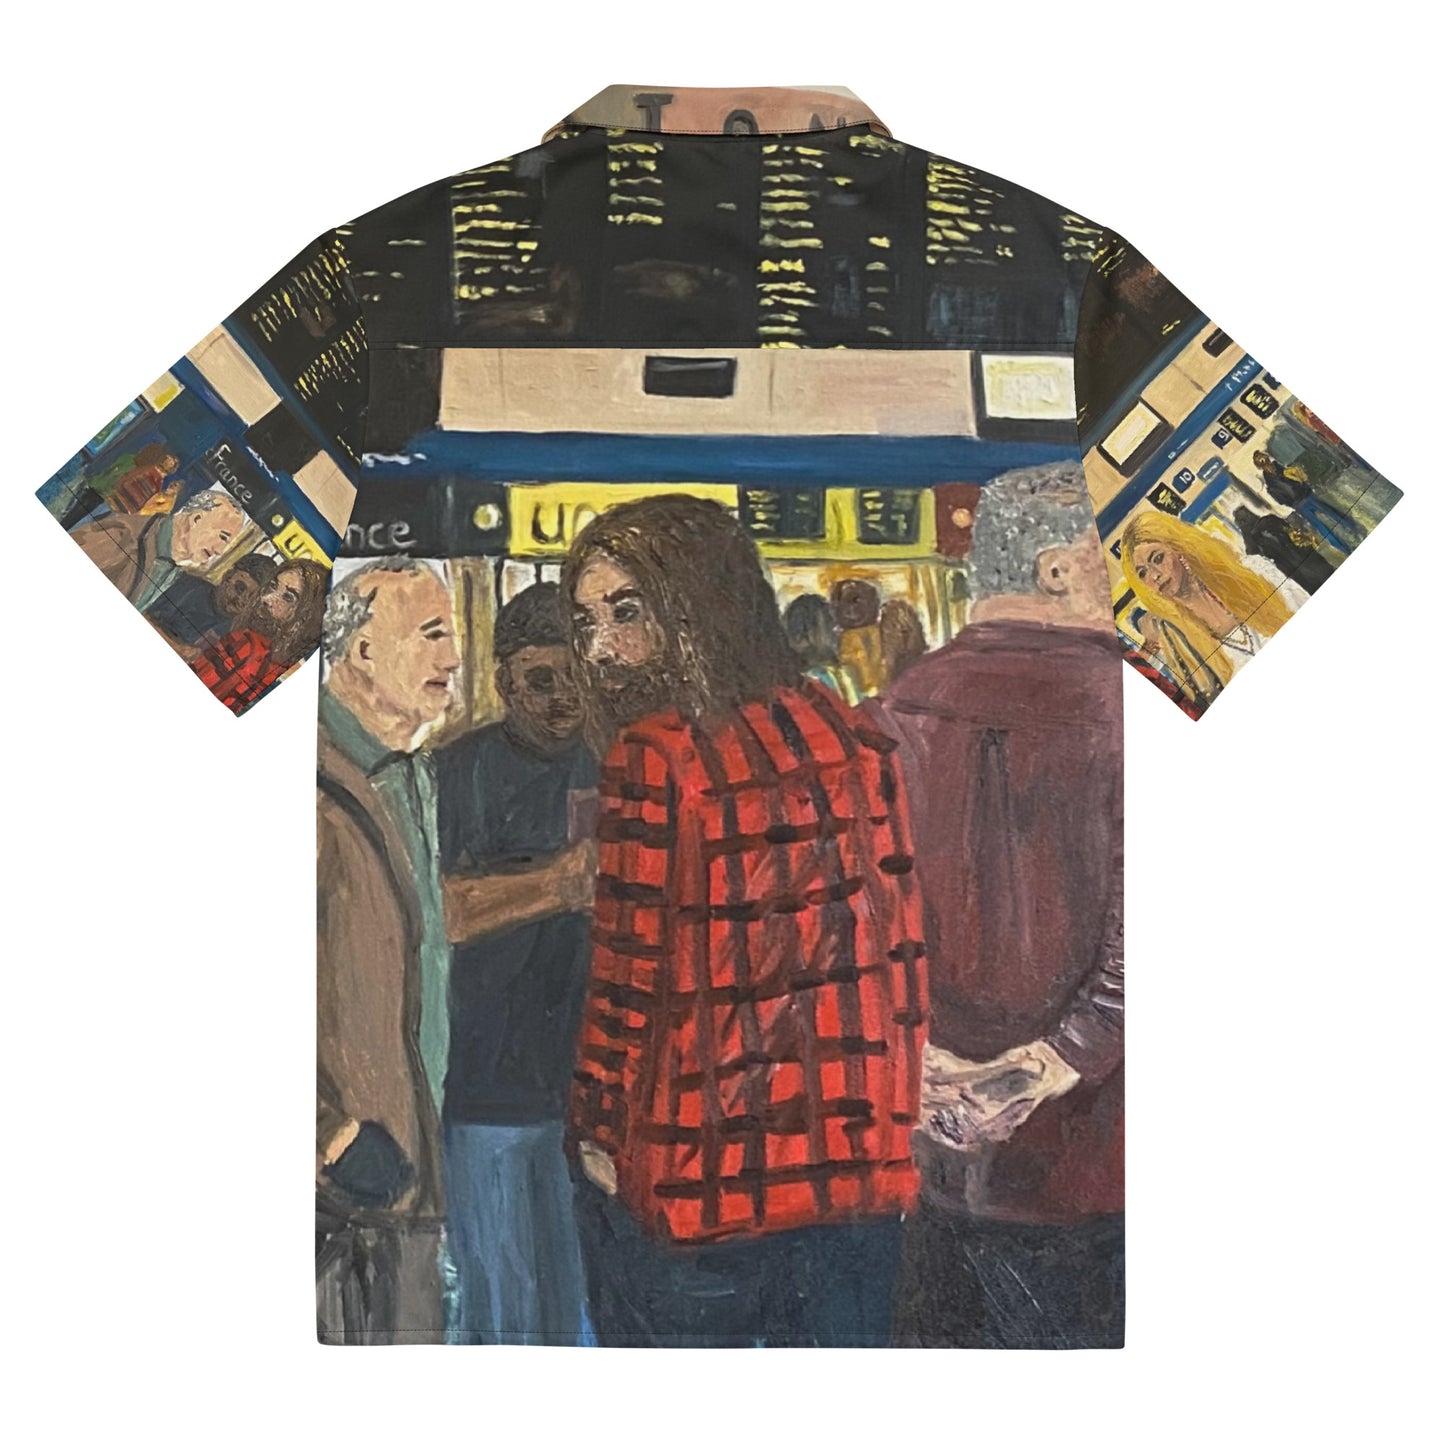 In the City - Unisex button shirt